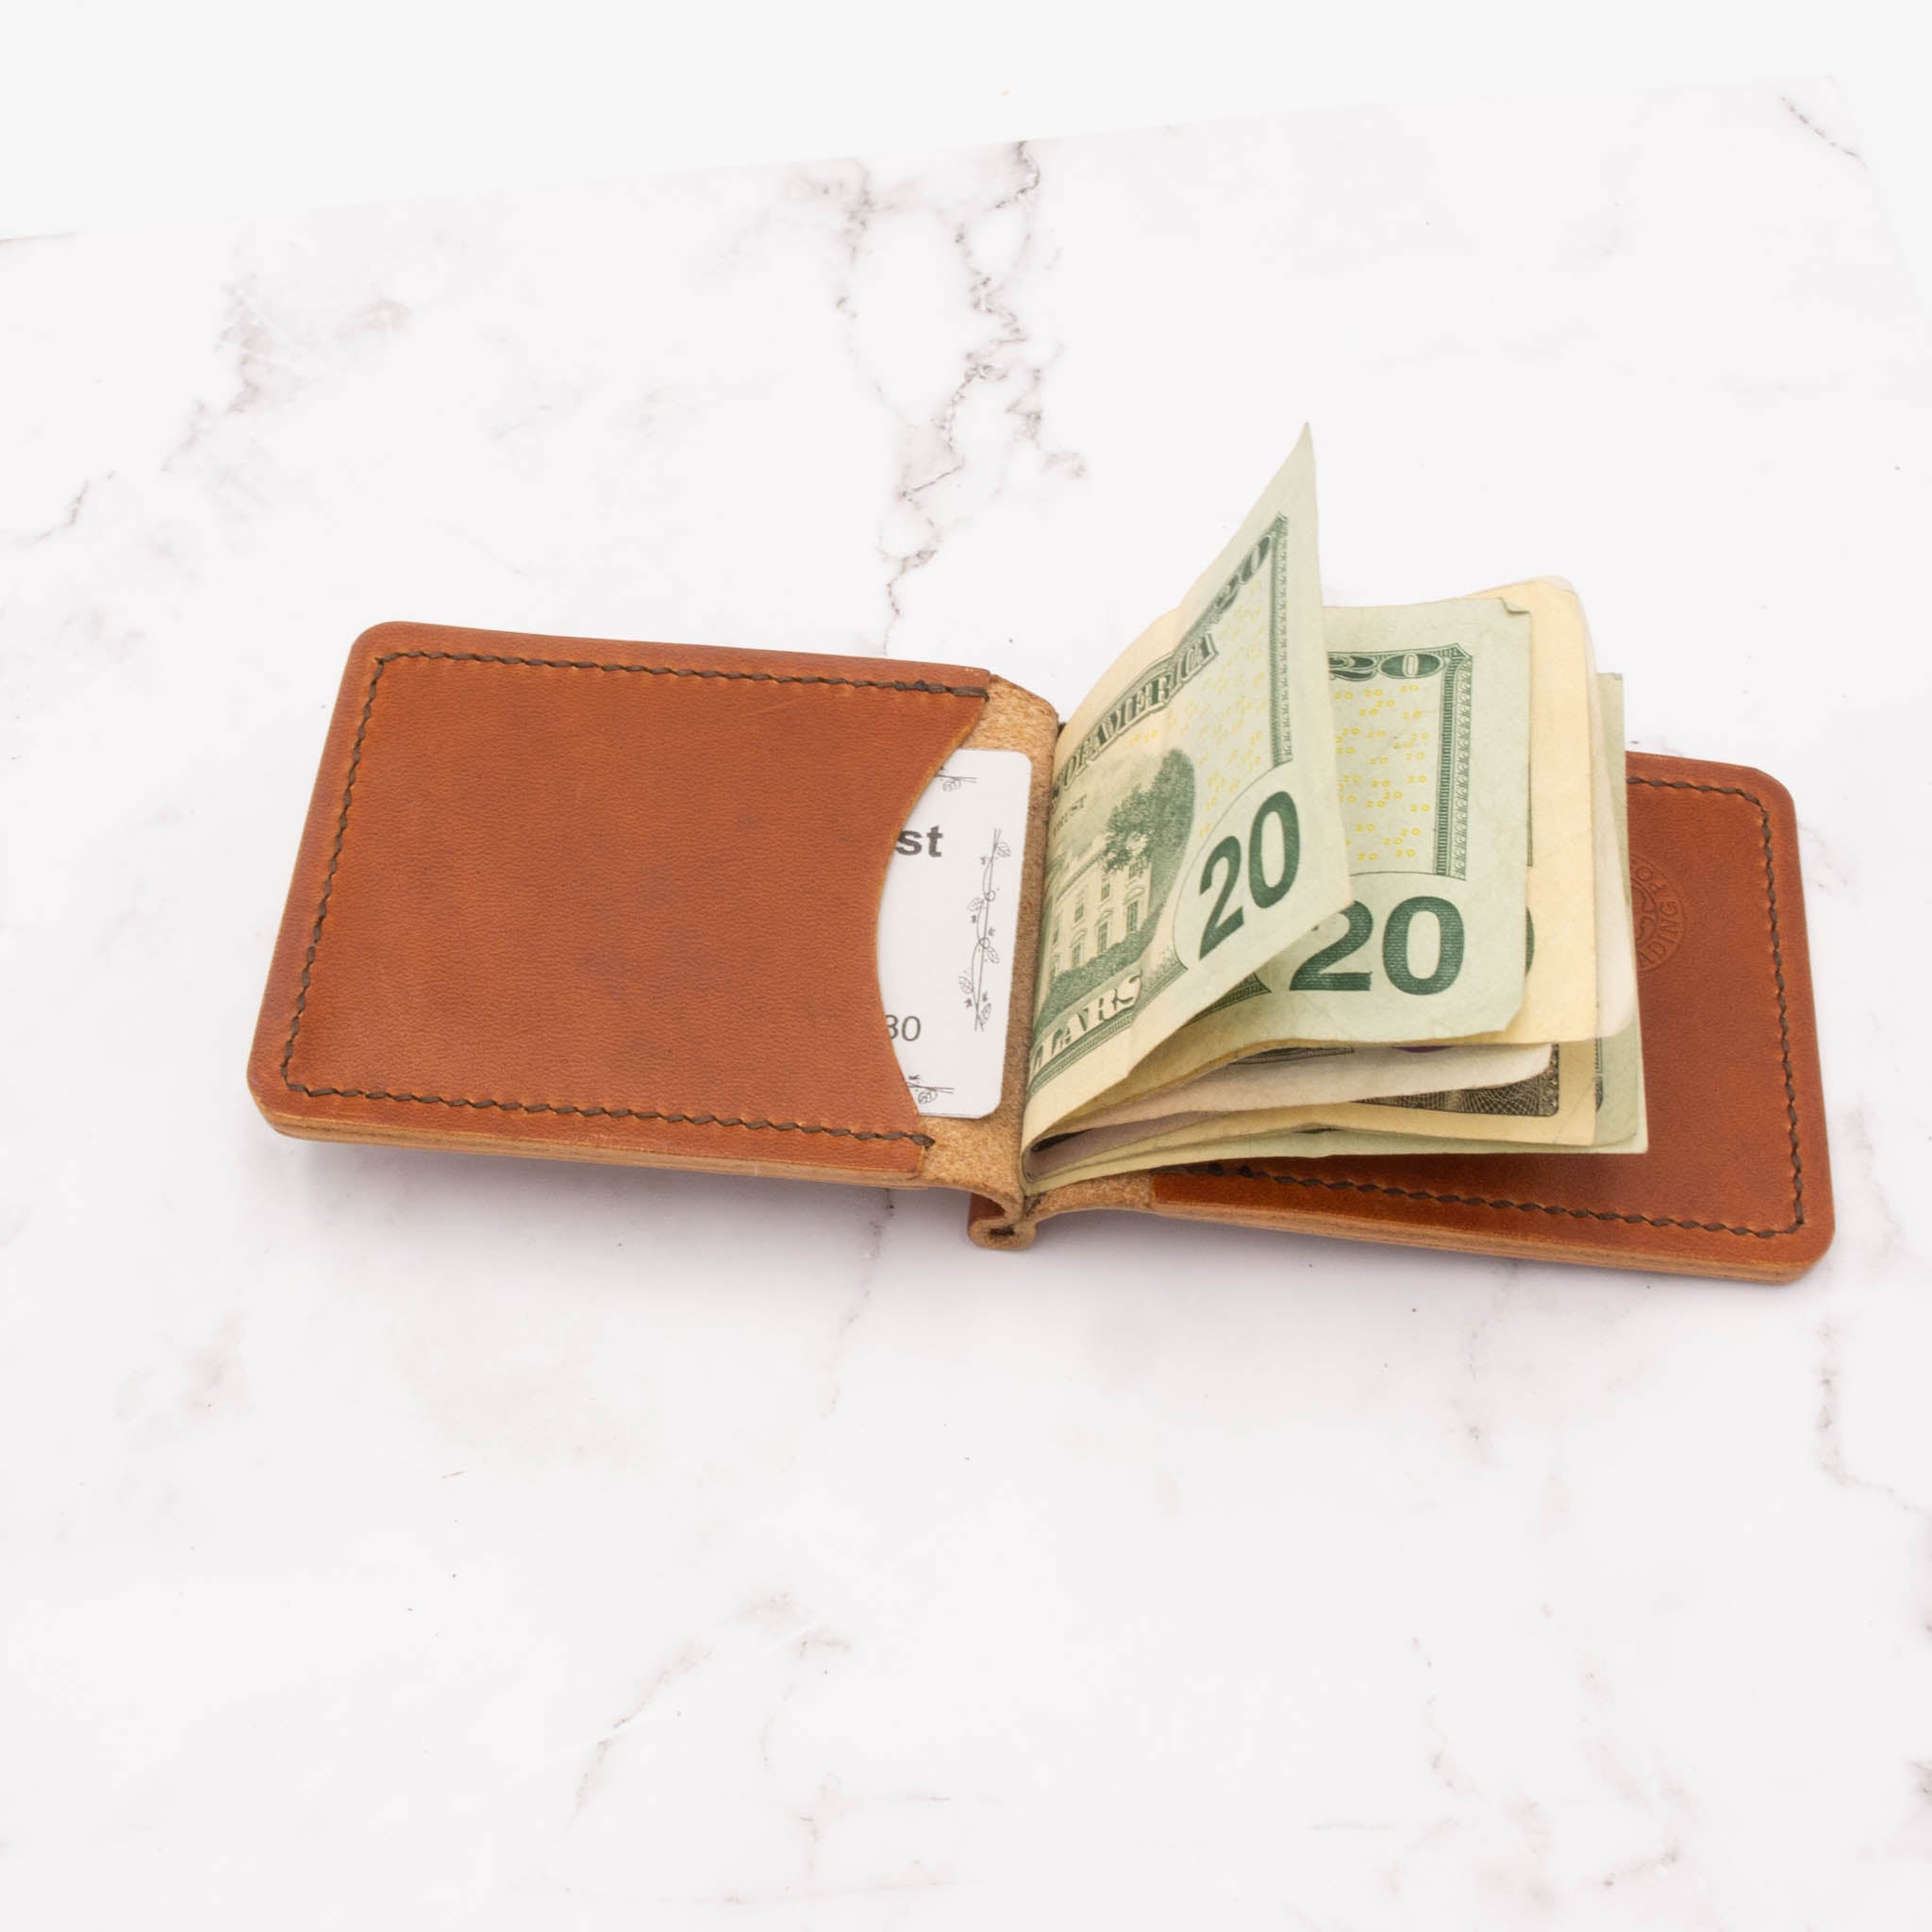 Leather Money Clip Card Holder Wallet - English Tan